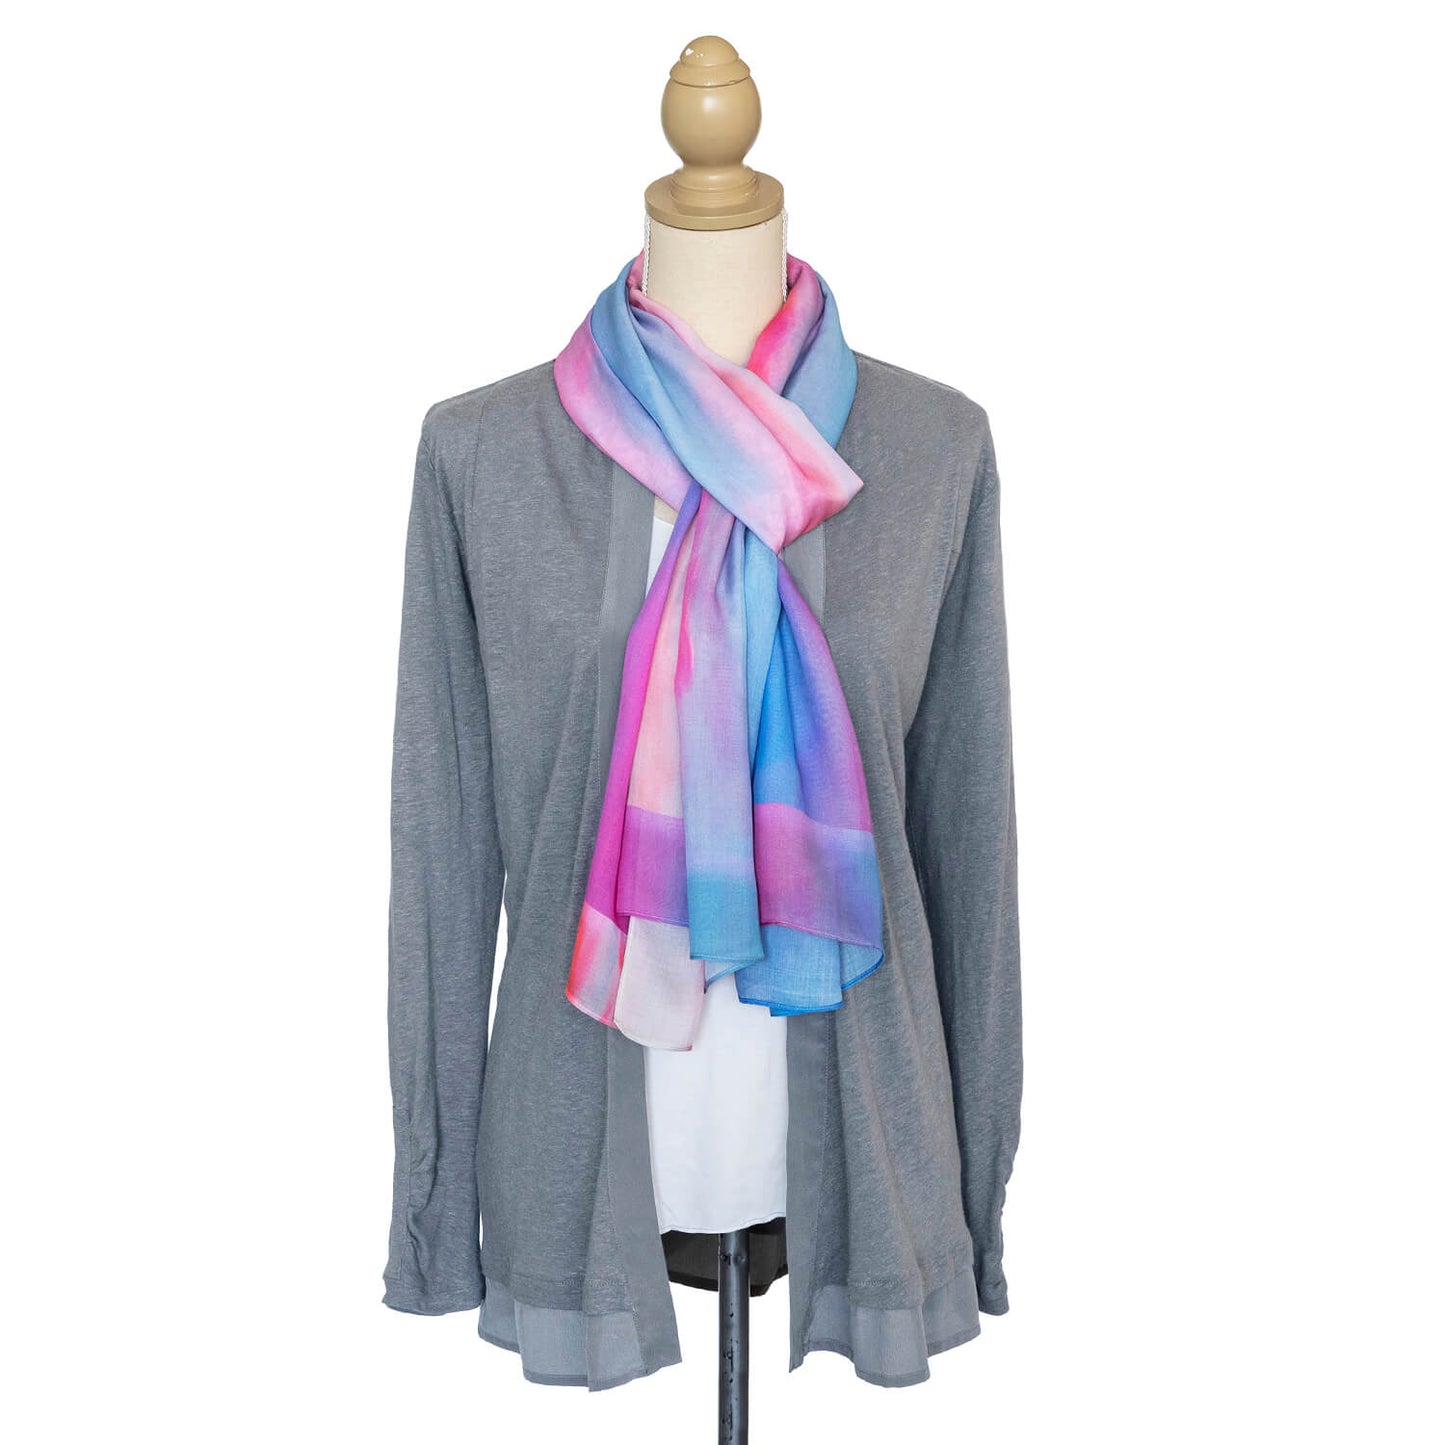 g & t time pink & blue scarf with grey jacket by seahorse silks